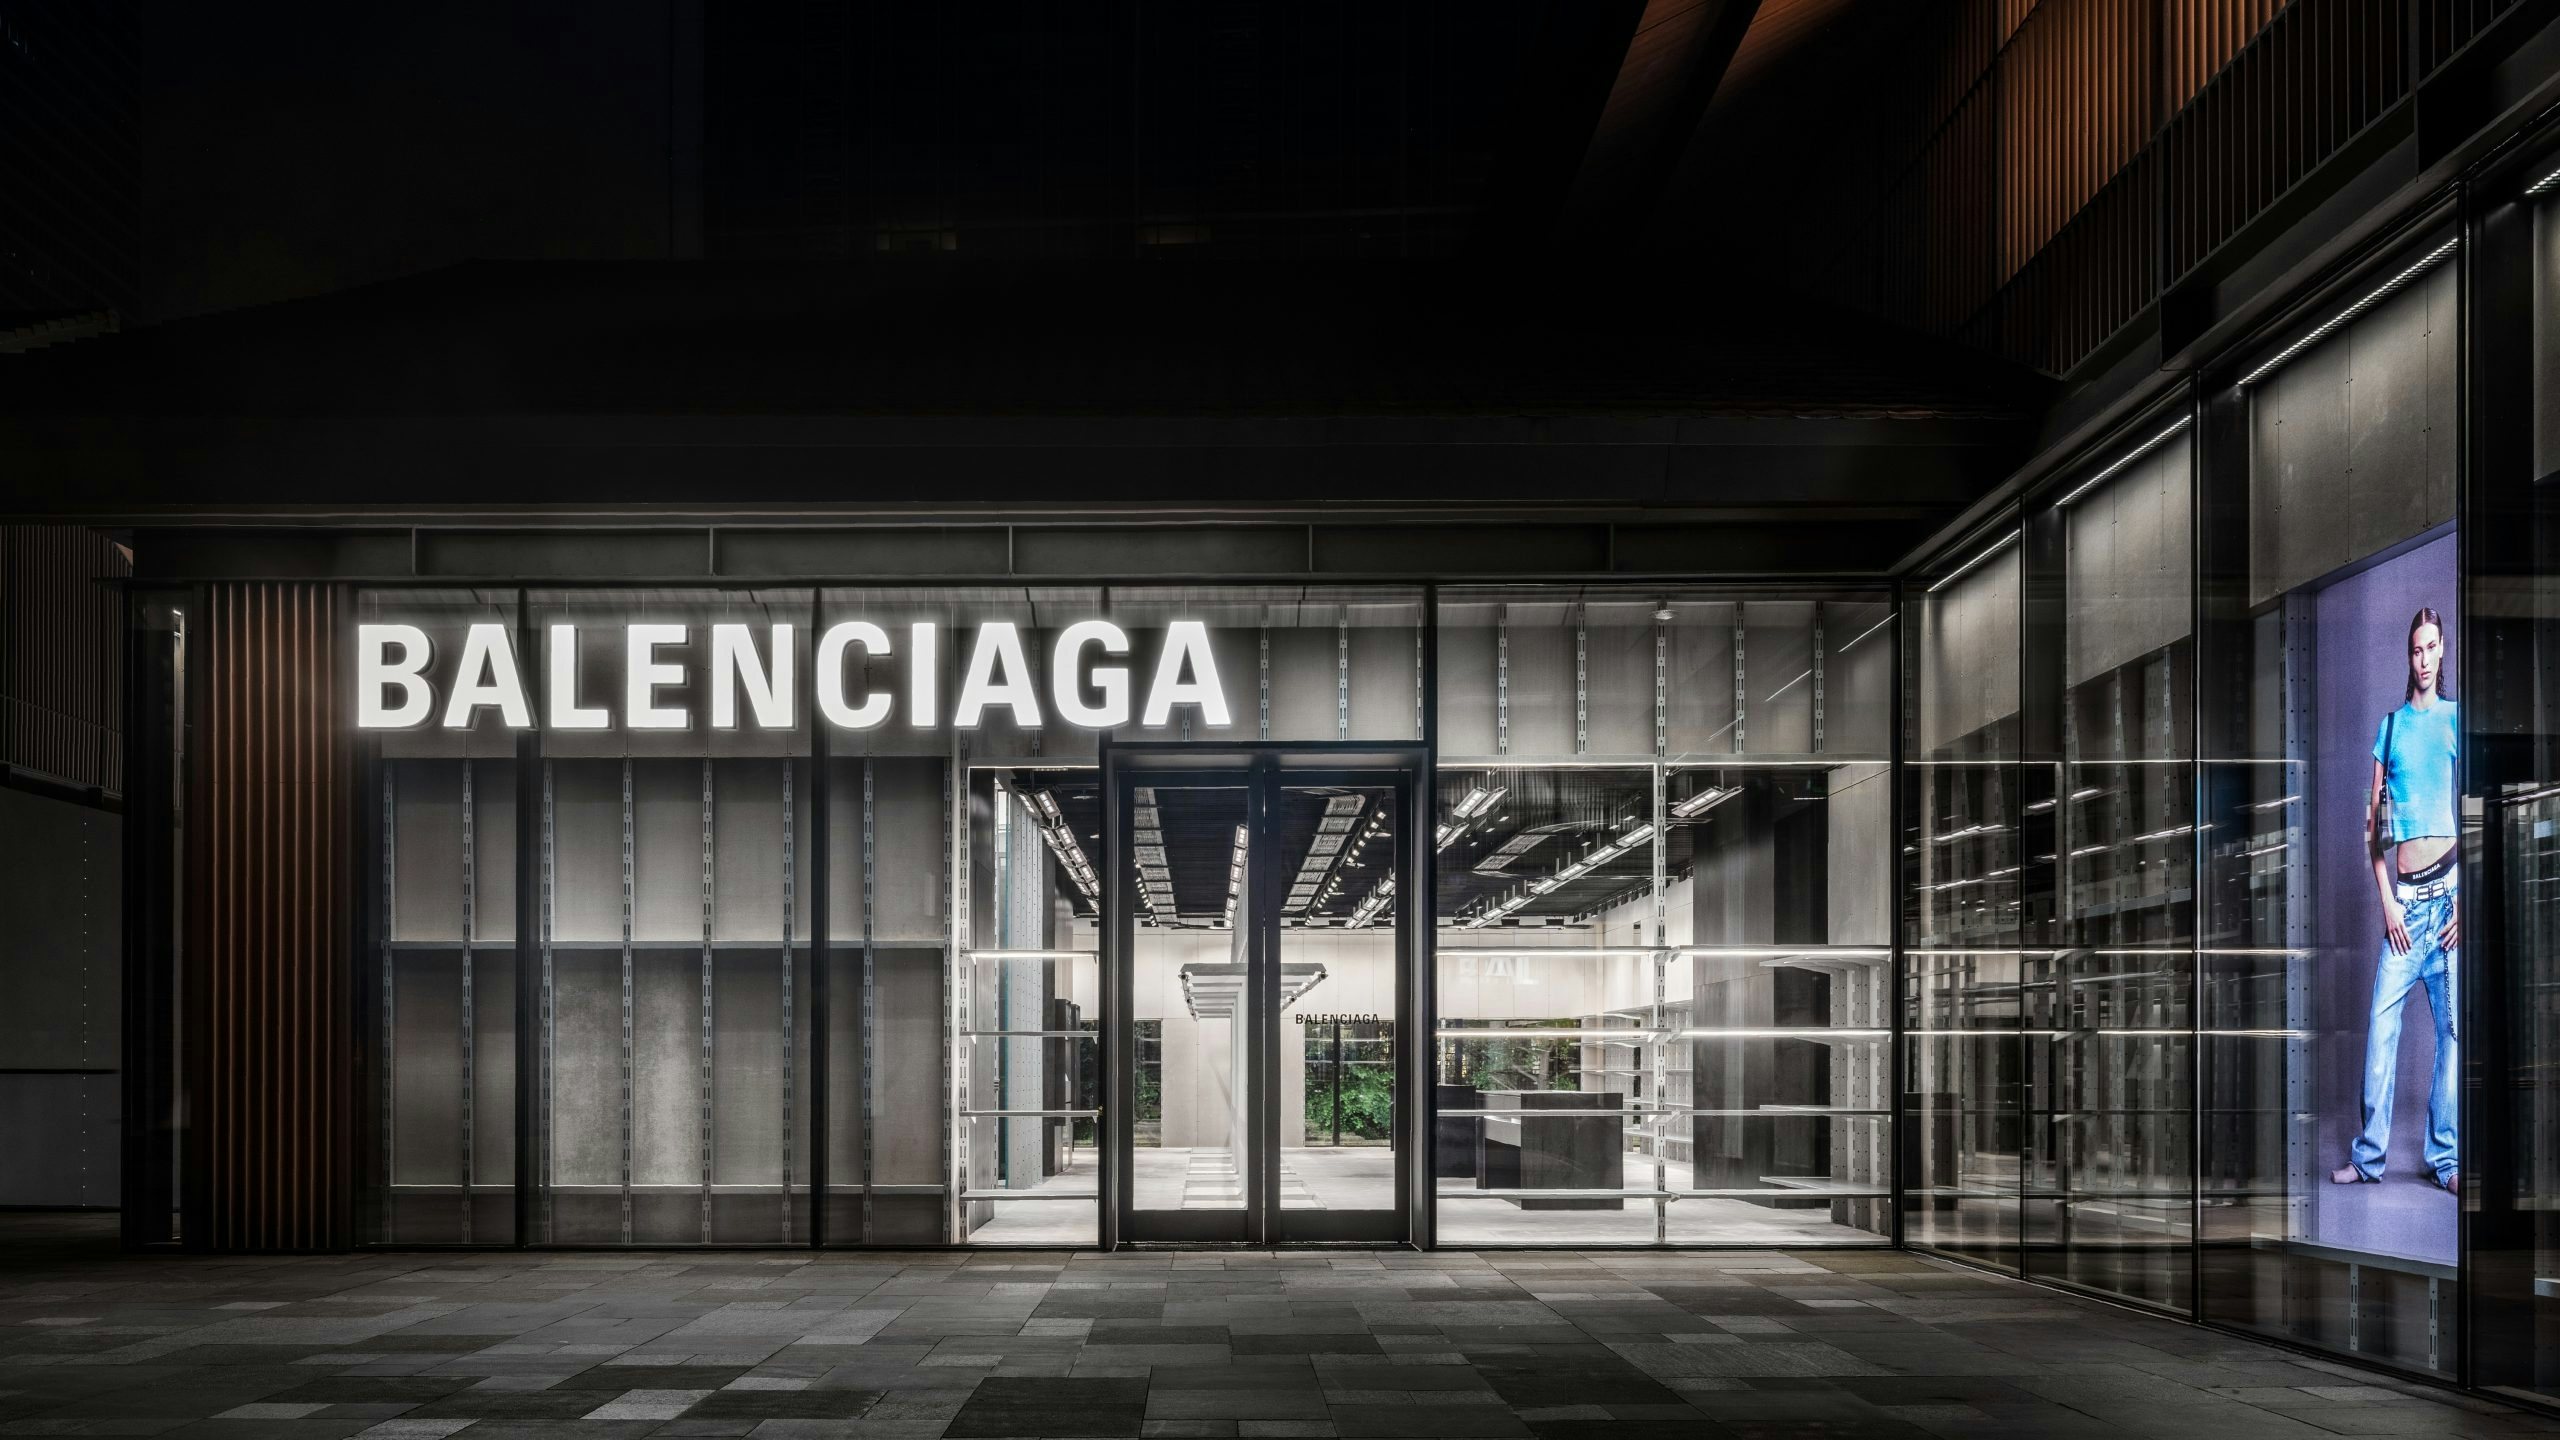 From revamped interiors to exclusive products, Balenciaga’s new flagship store in Chengdu offers an elevated retail experience to lure consumers back. Photo: Courtesy of Balenciaga. Photographer: Boris Shiu@AGENT PAY